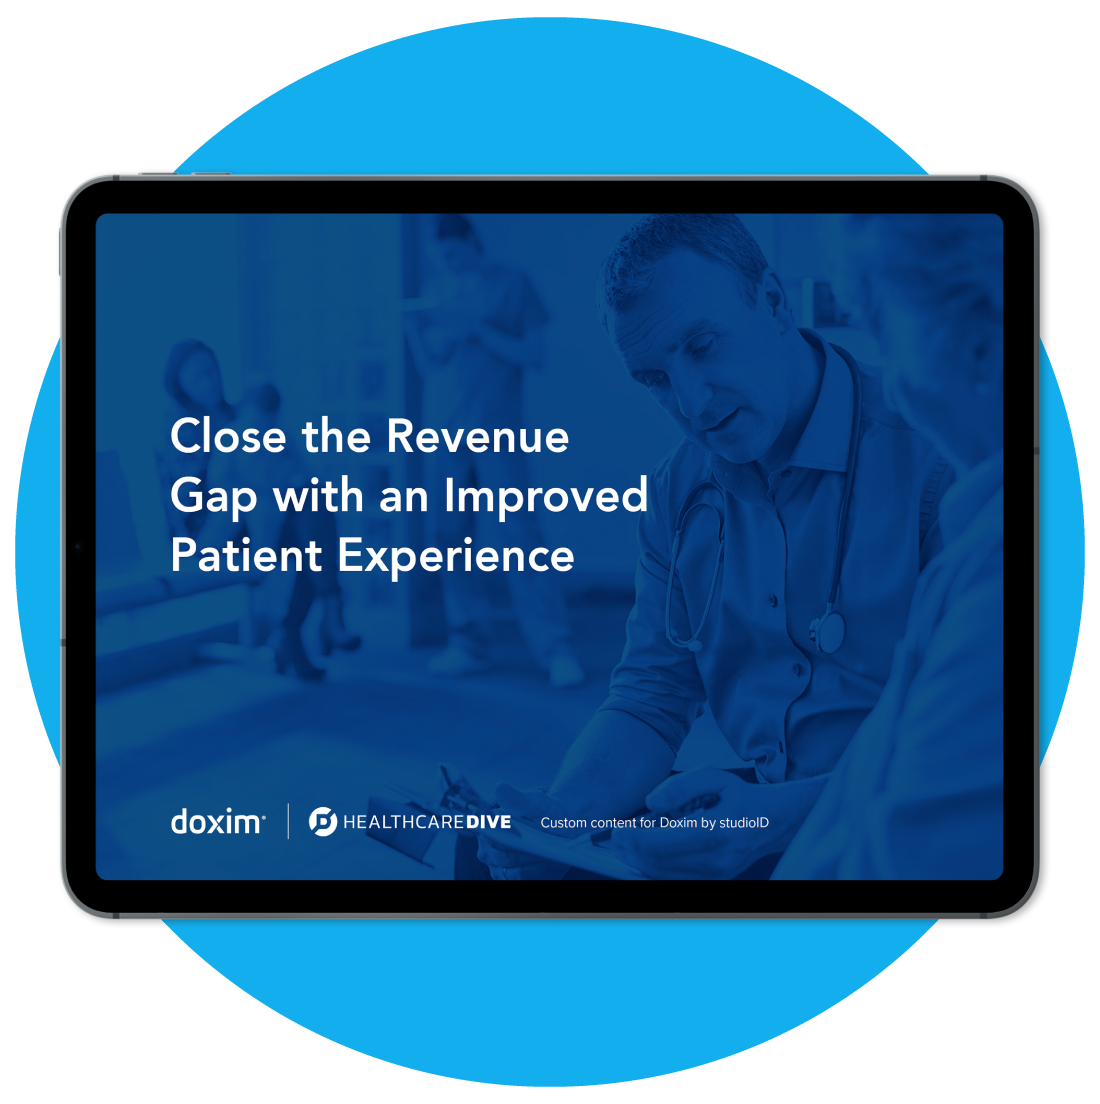 Playbook: Close the Revenue Gap with an Improved Patient Experience on tablet screen